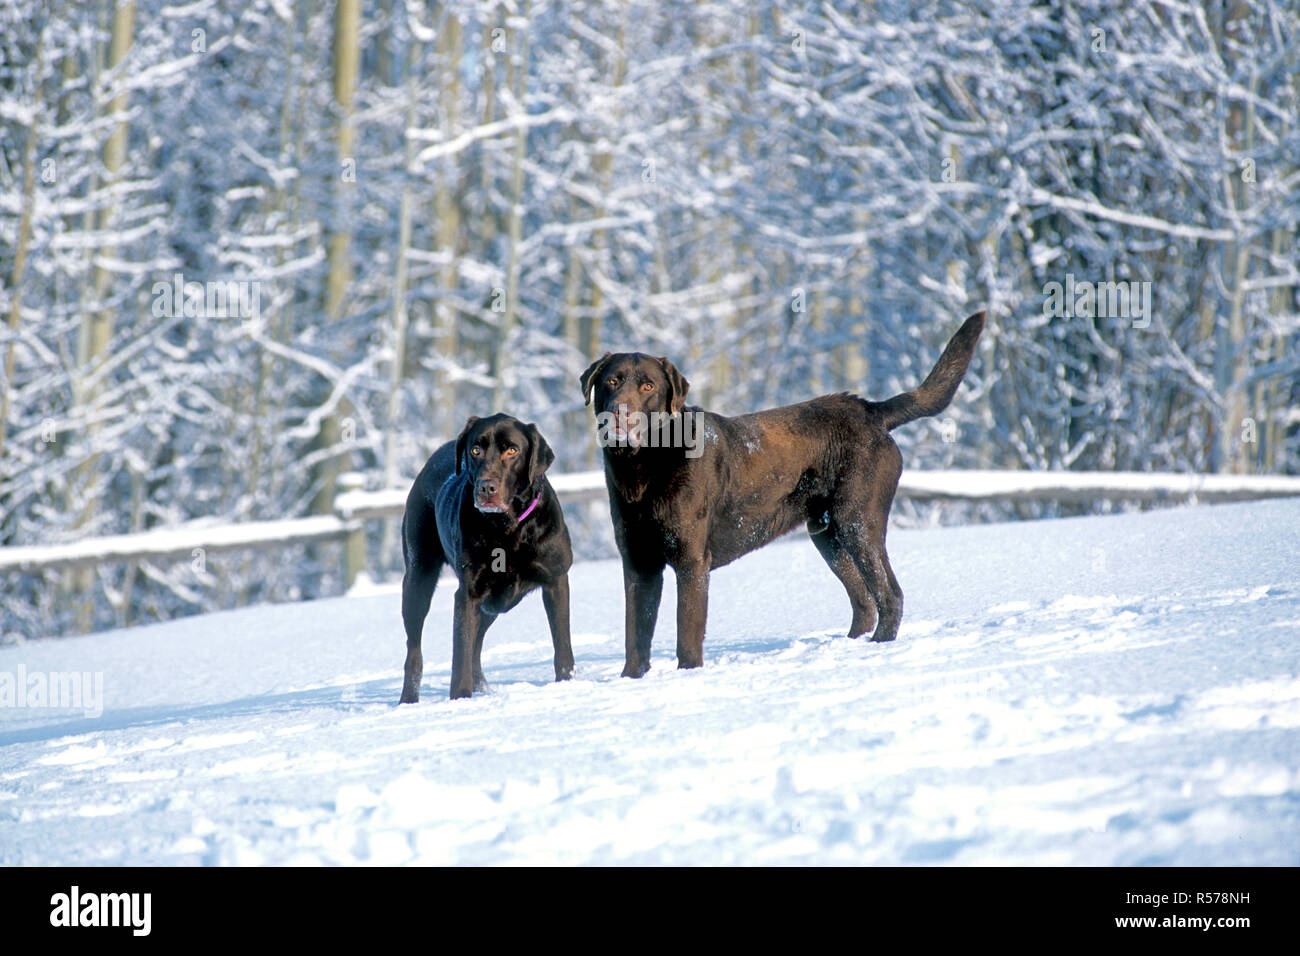 Two Chocolate Labrador Retrievers playing together in meadow in fresh snow. Stock Photo